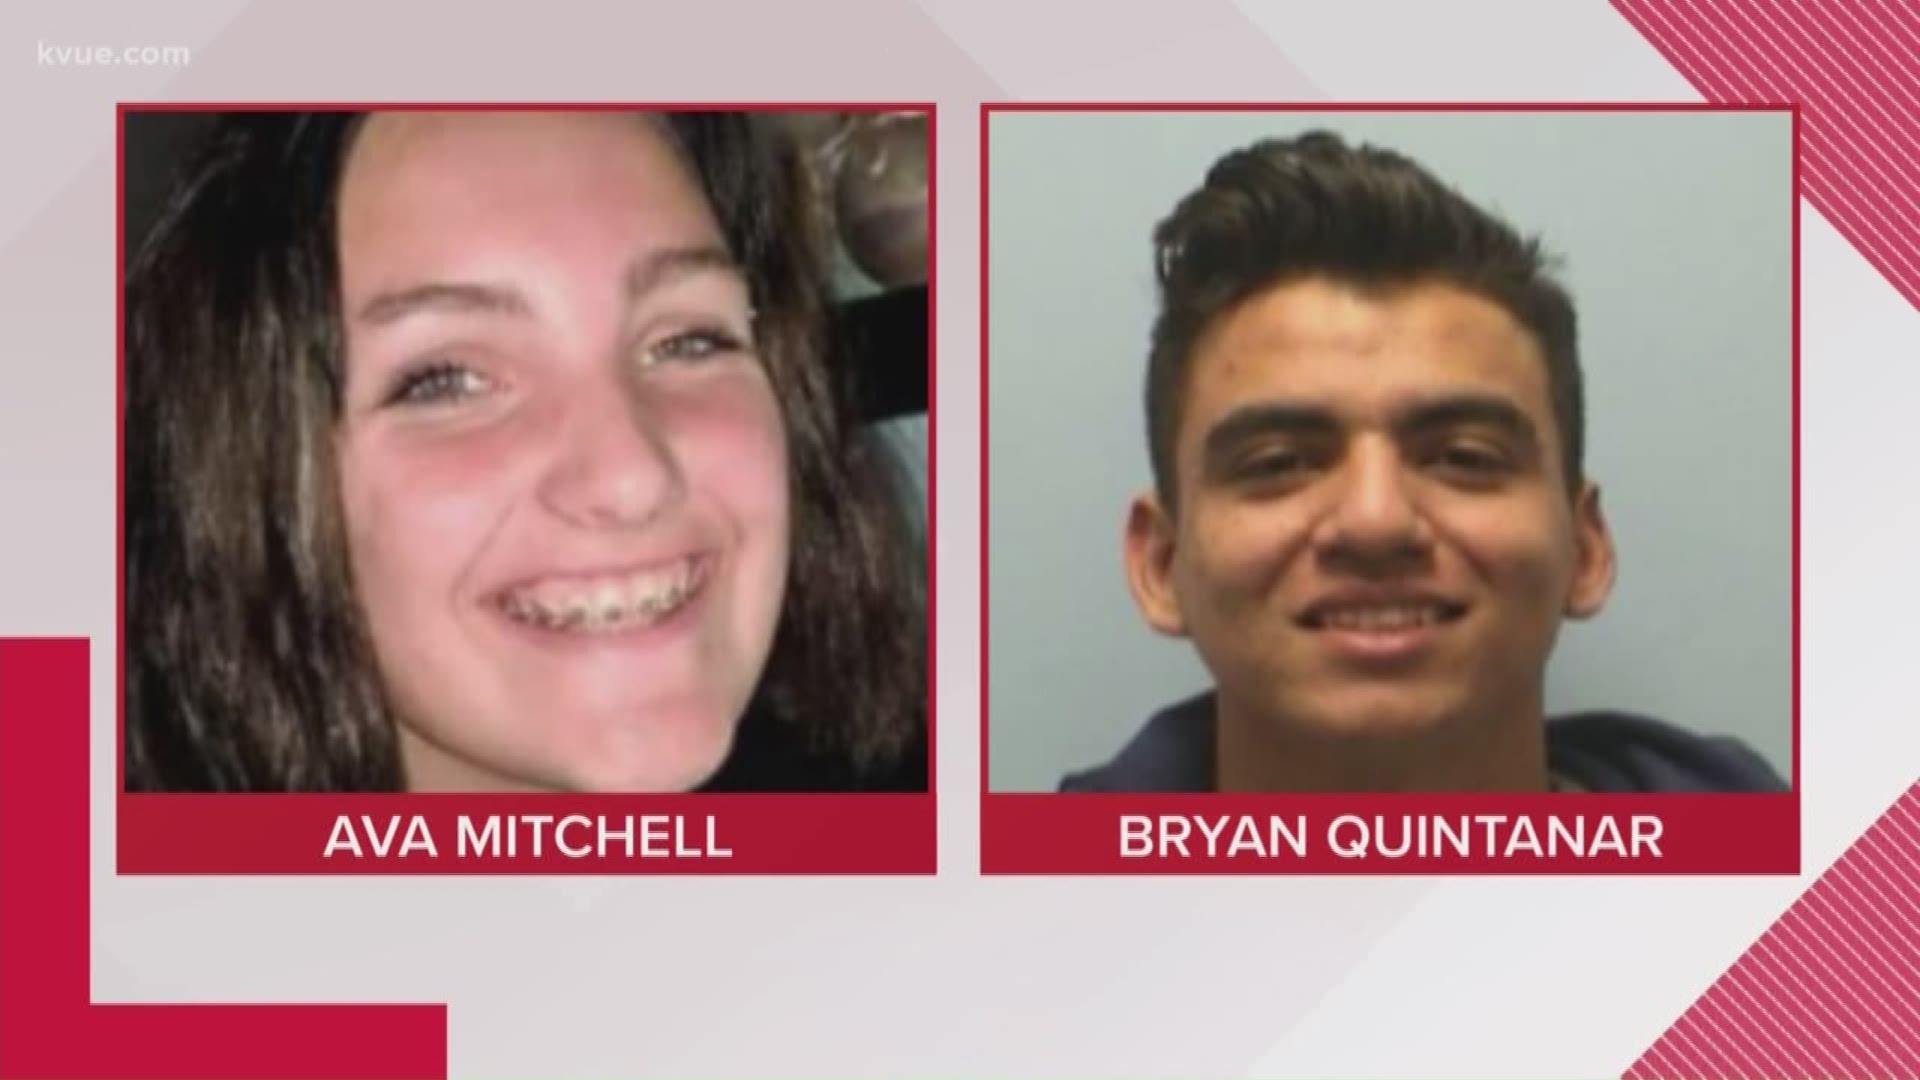 Ava Mitchell was last seen with 22-year-old Bryan Quintanar.